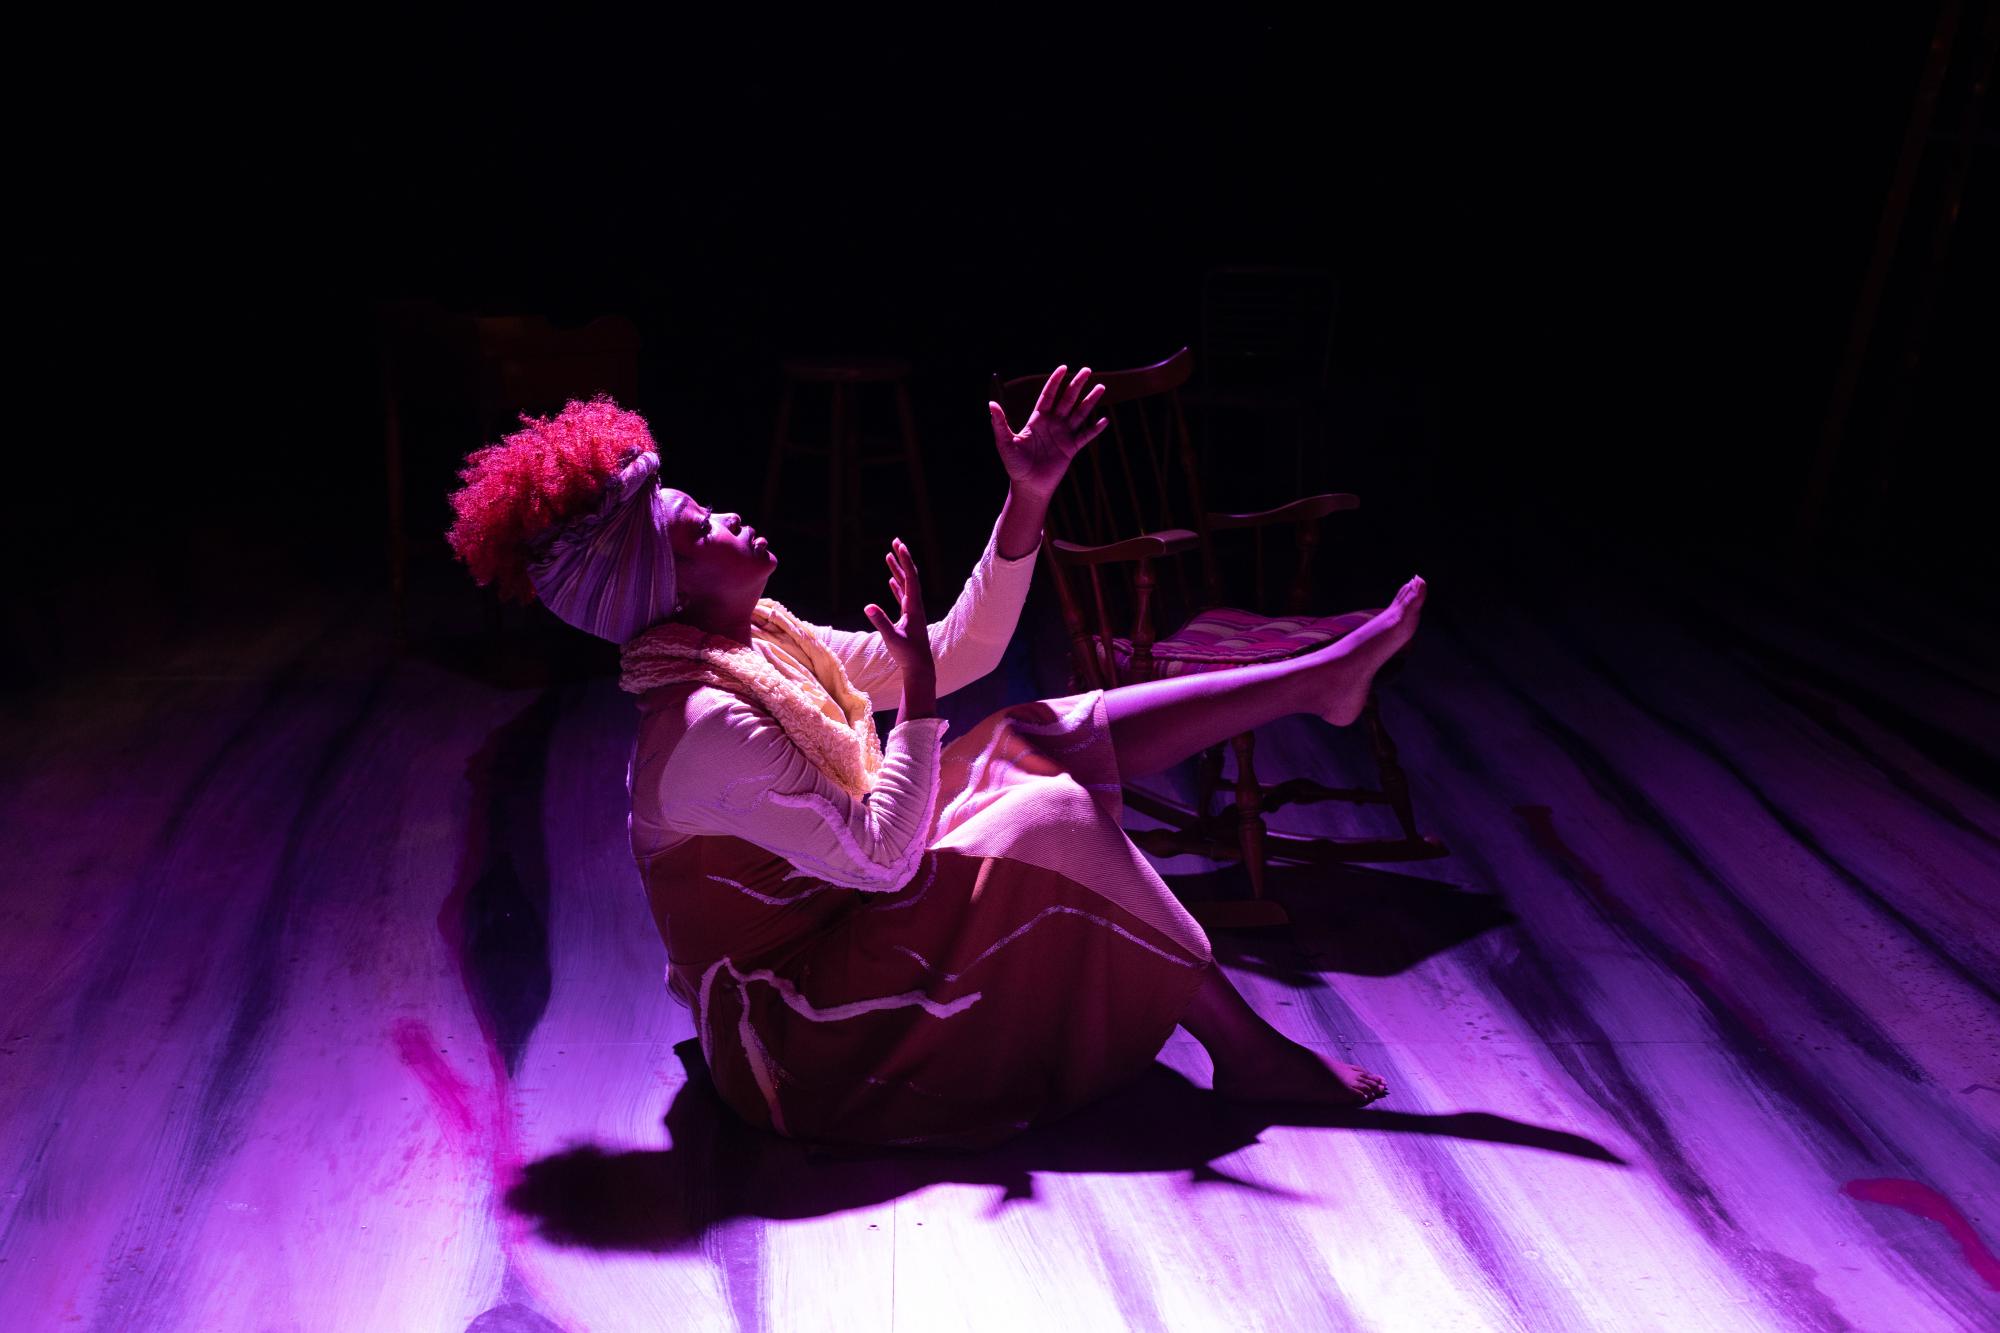 woman sits on the ground with her arms reaching upward, washed in purple stage light